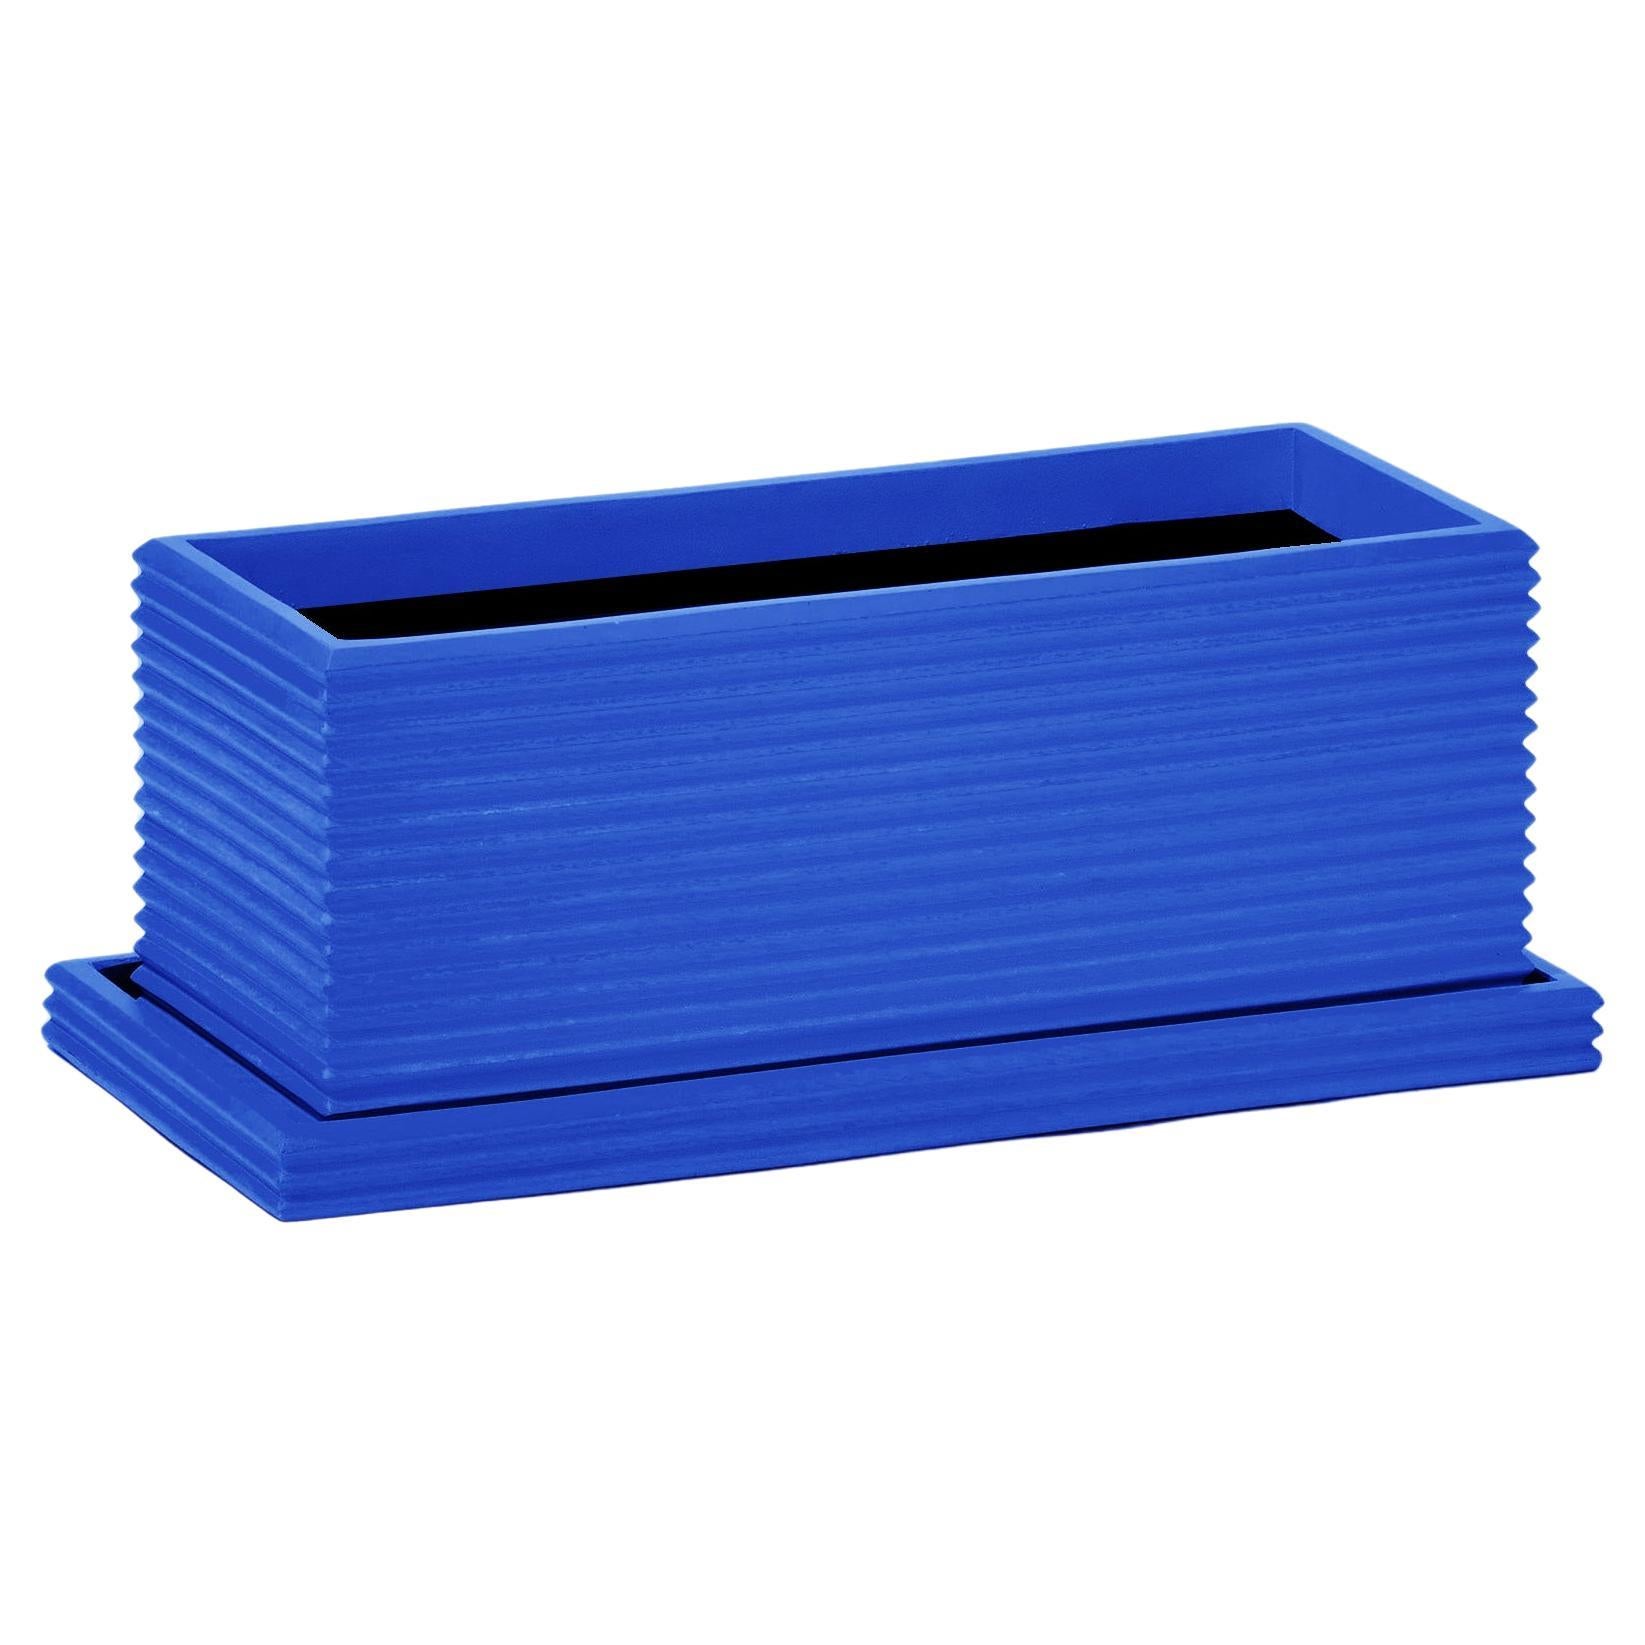 Standard Wide Rectangular Planter 'Blue' by TFM, Represented by Tuleste Factory